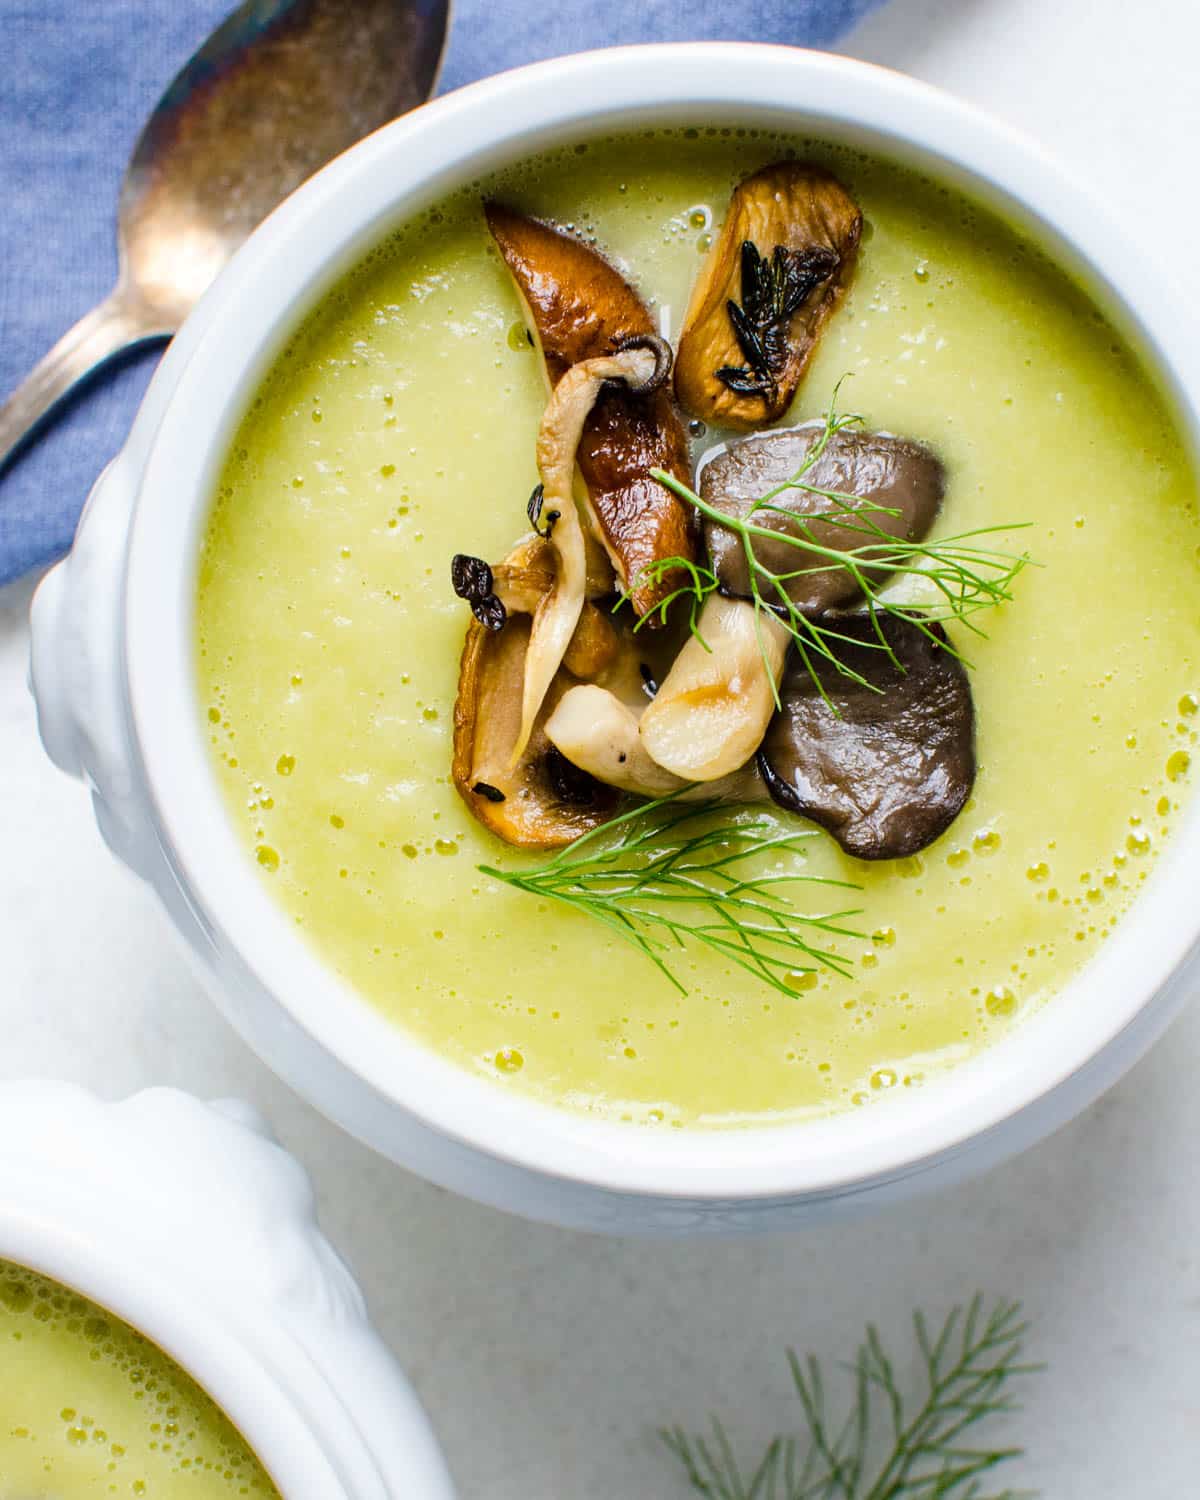 A bowl of fennel leek soup with wild mushrooms.